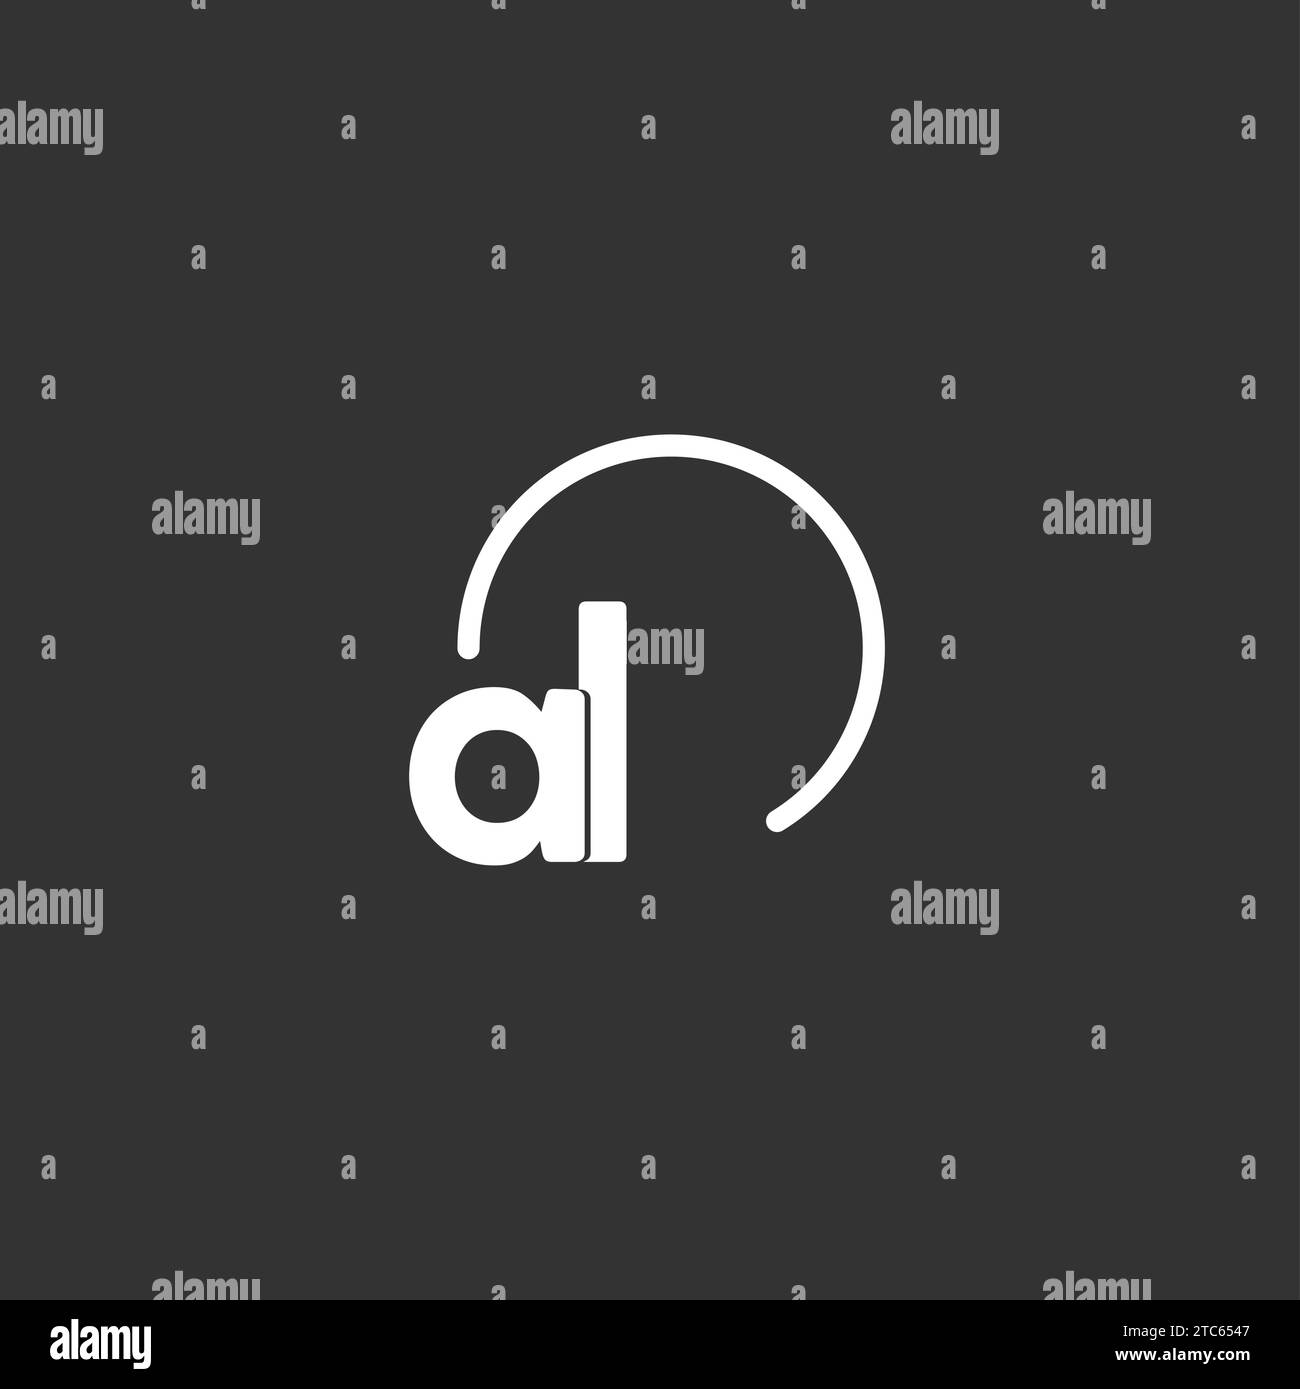 AL initial logo with rounded circle vector graphic Stock Vector